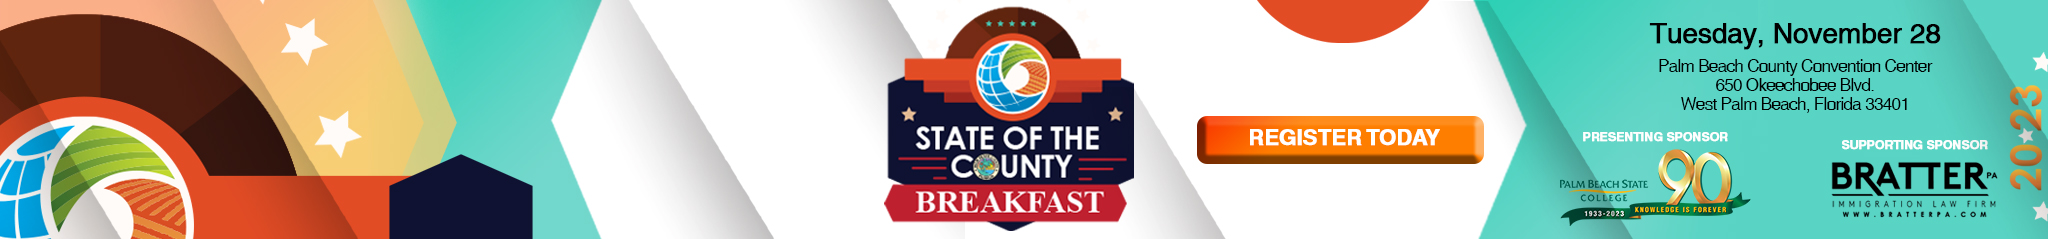 State of the county web banner